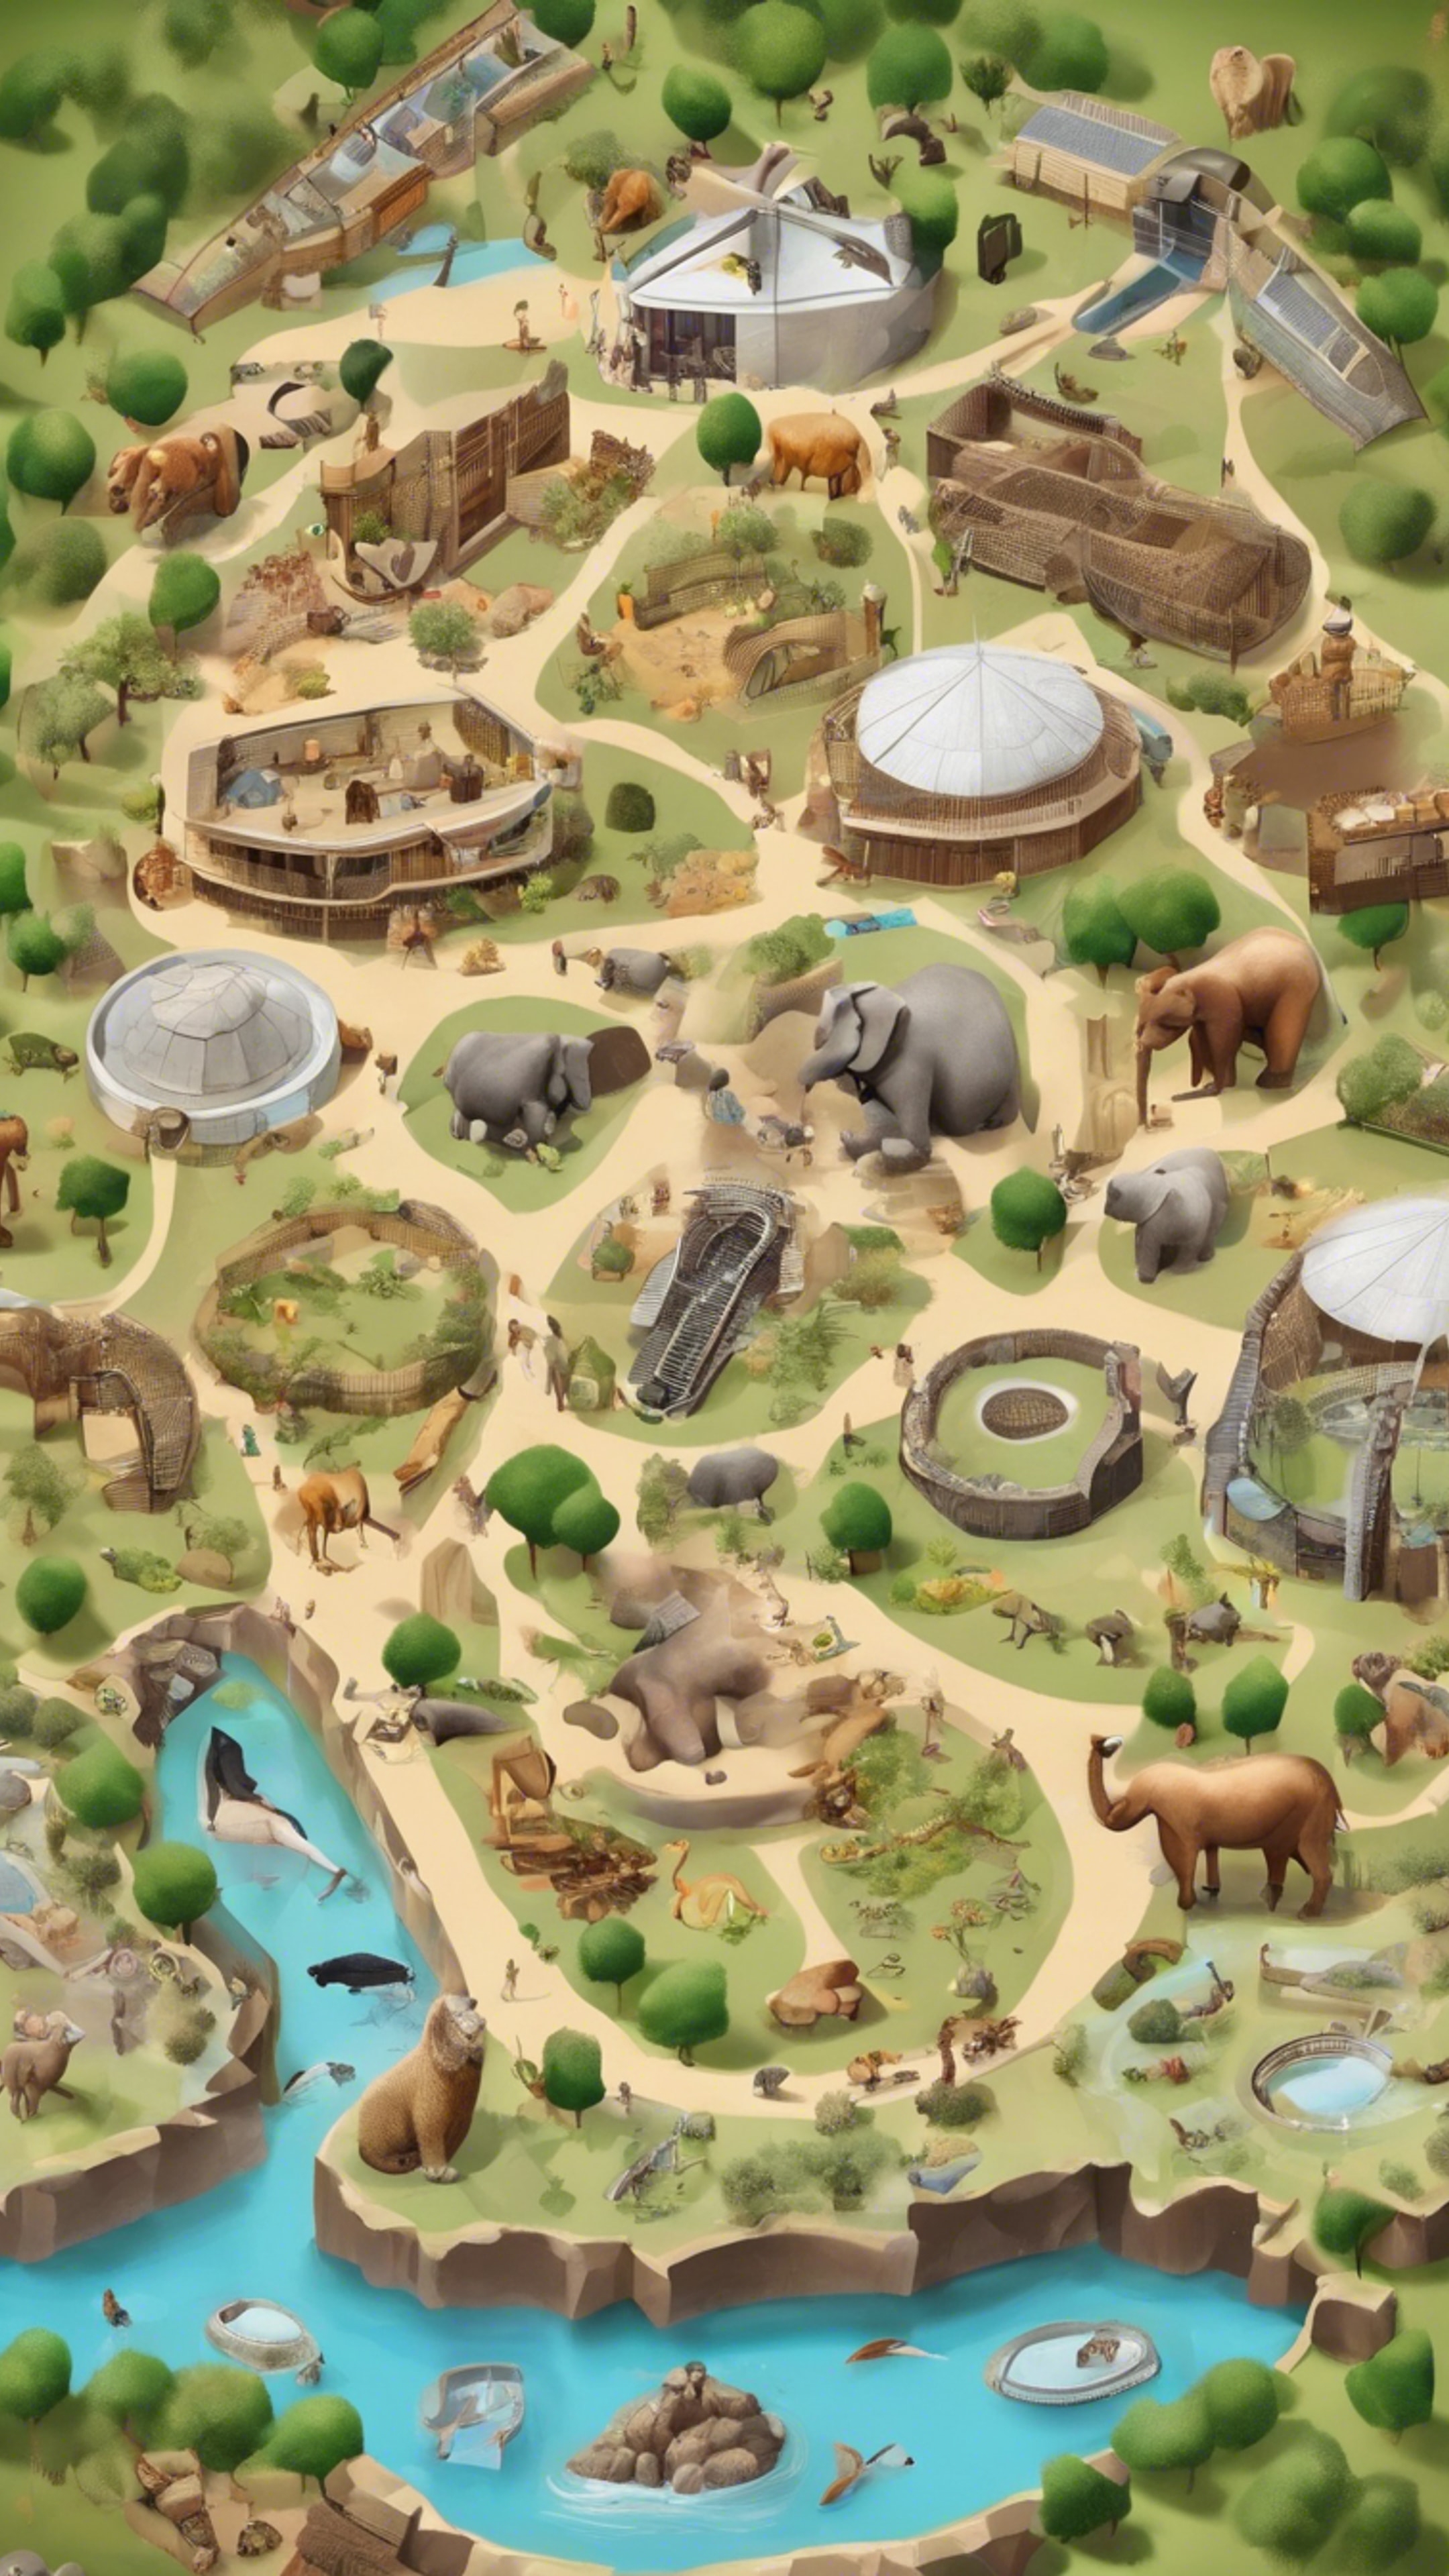 A graphic map of a zoo, with different animal enclosures, food stalls and amenities. Wallpaper[7d3ed7eed3f244f7a17f]